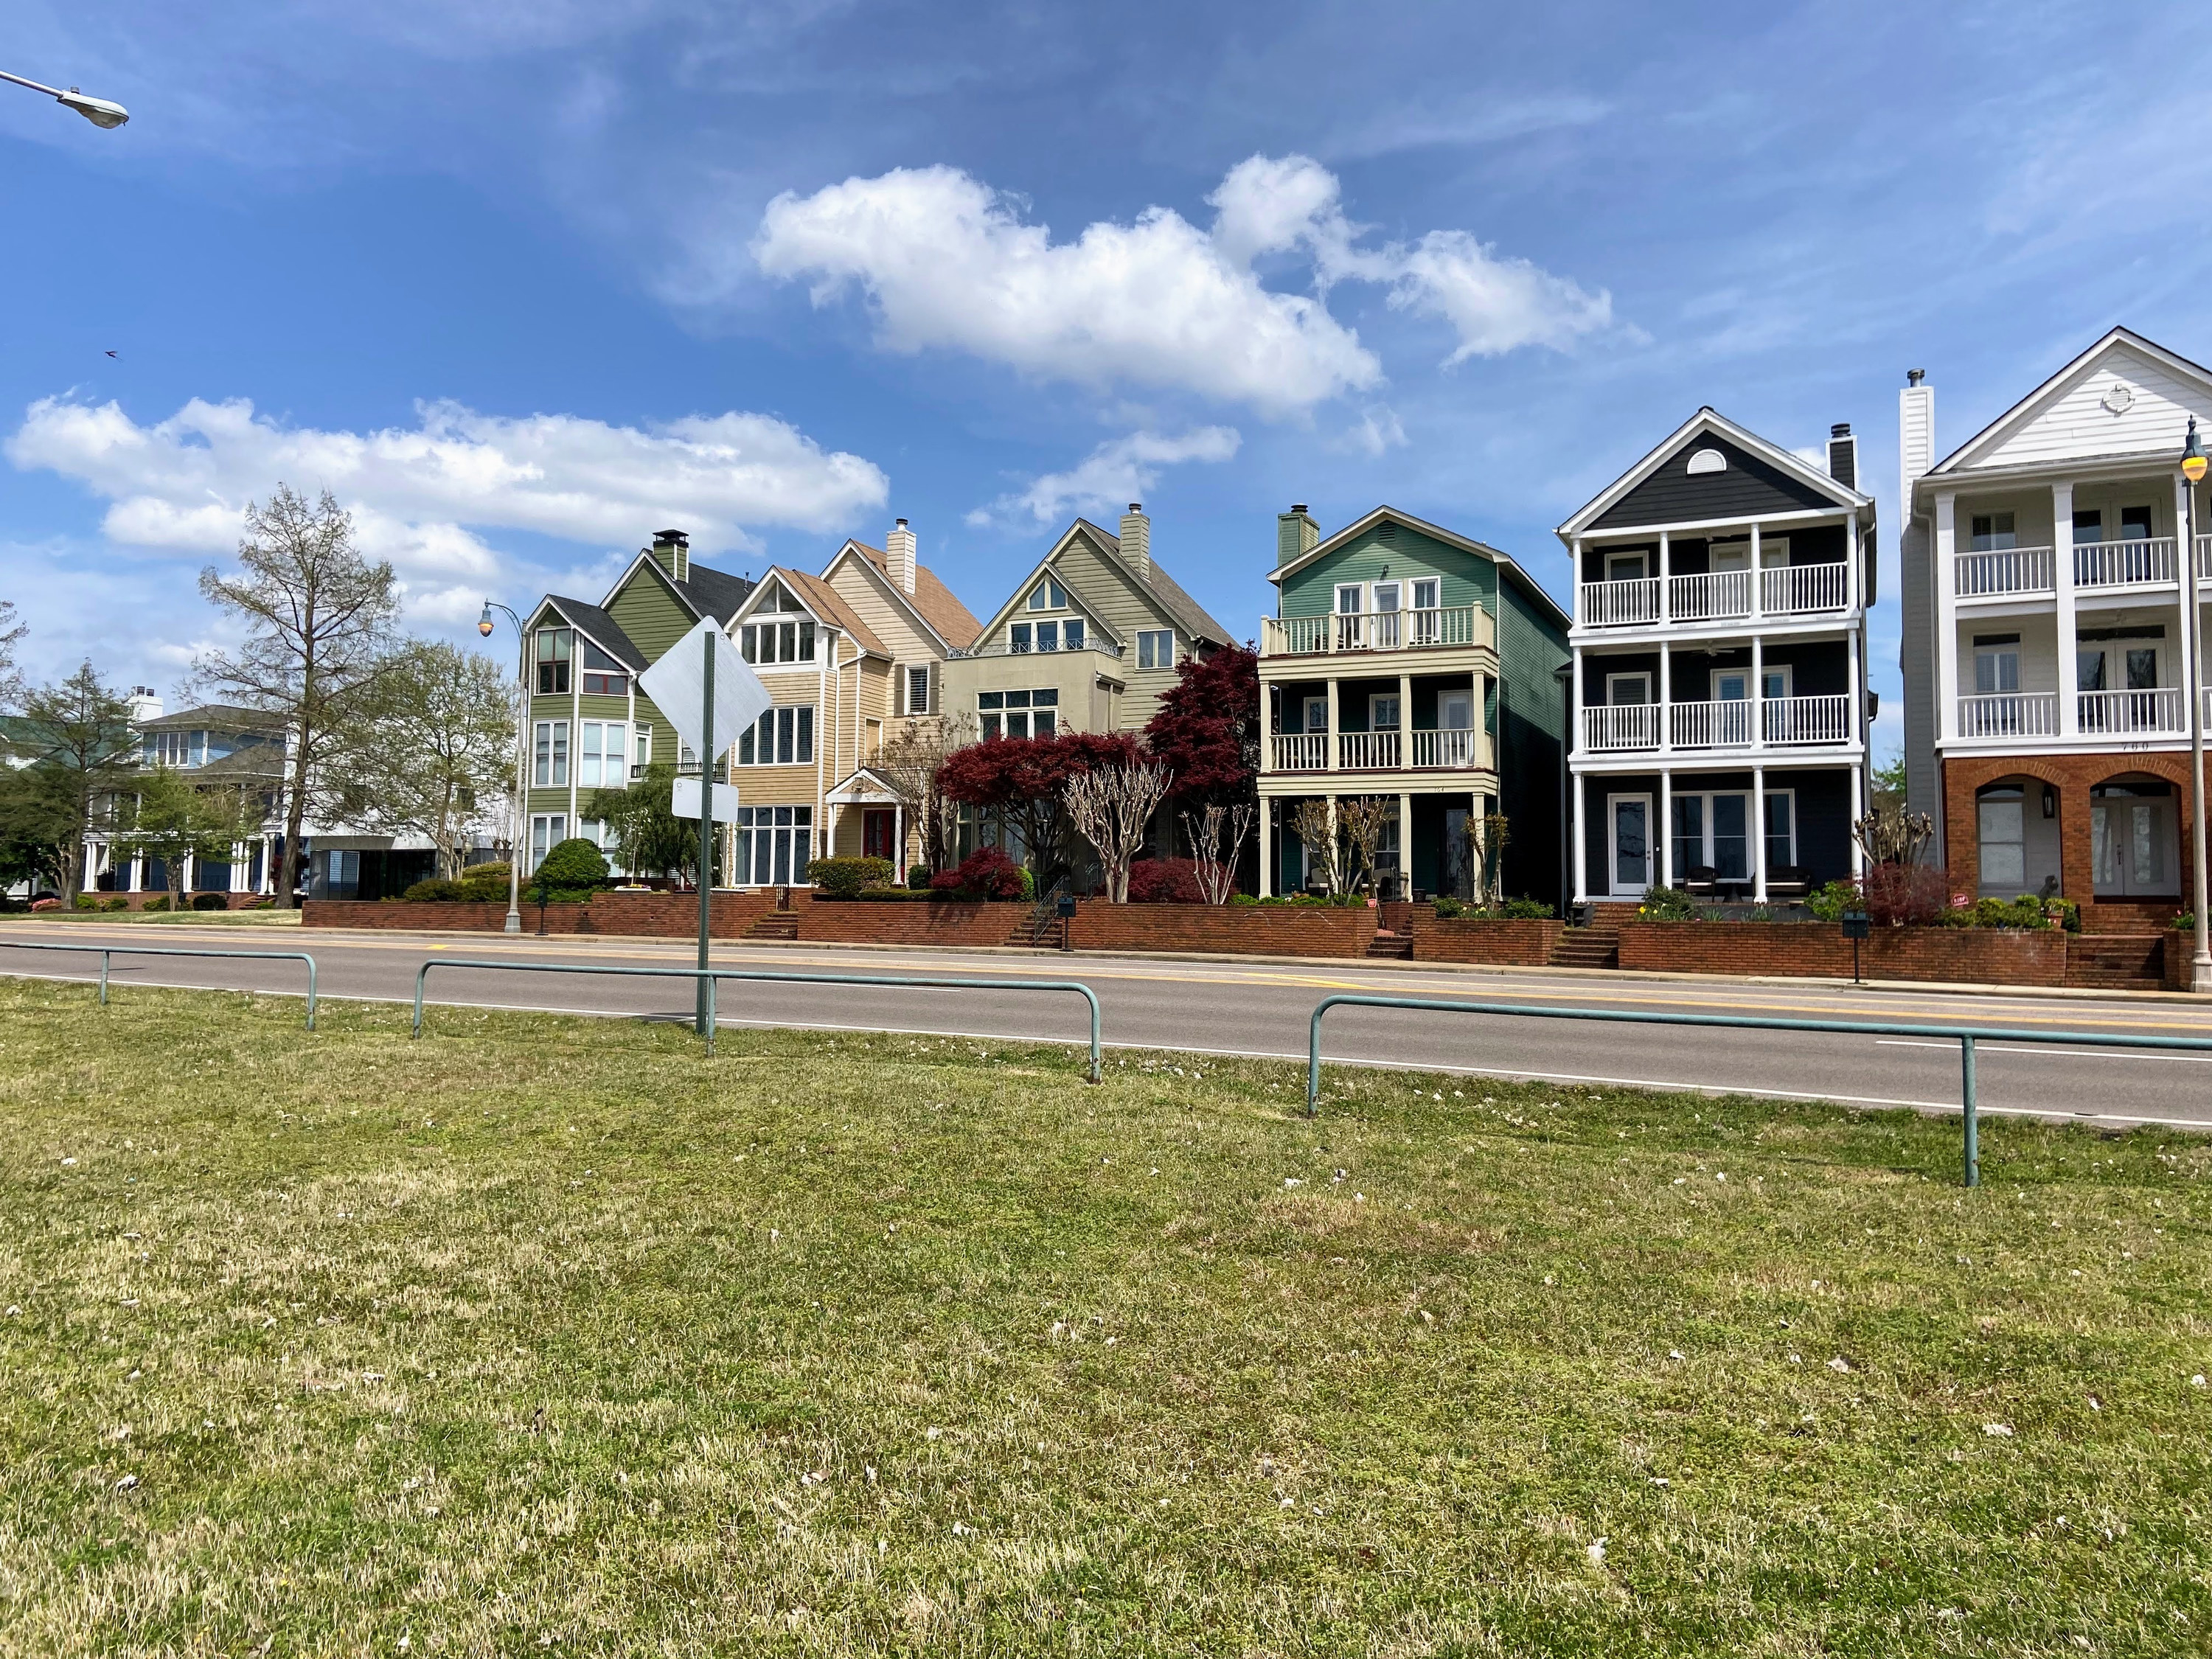 Row of Houses in Memphis, Tennessee, 2022